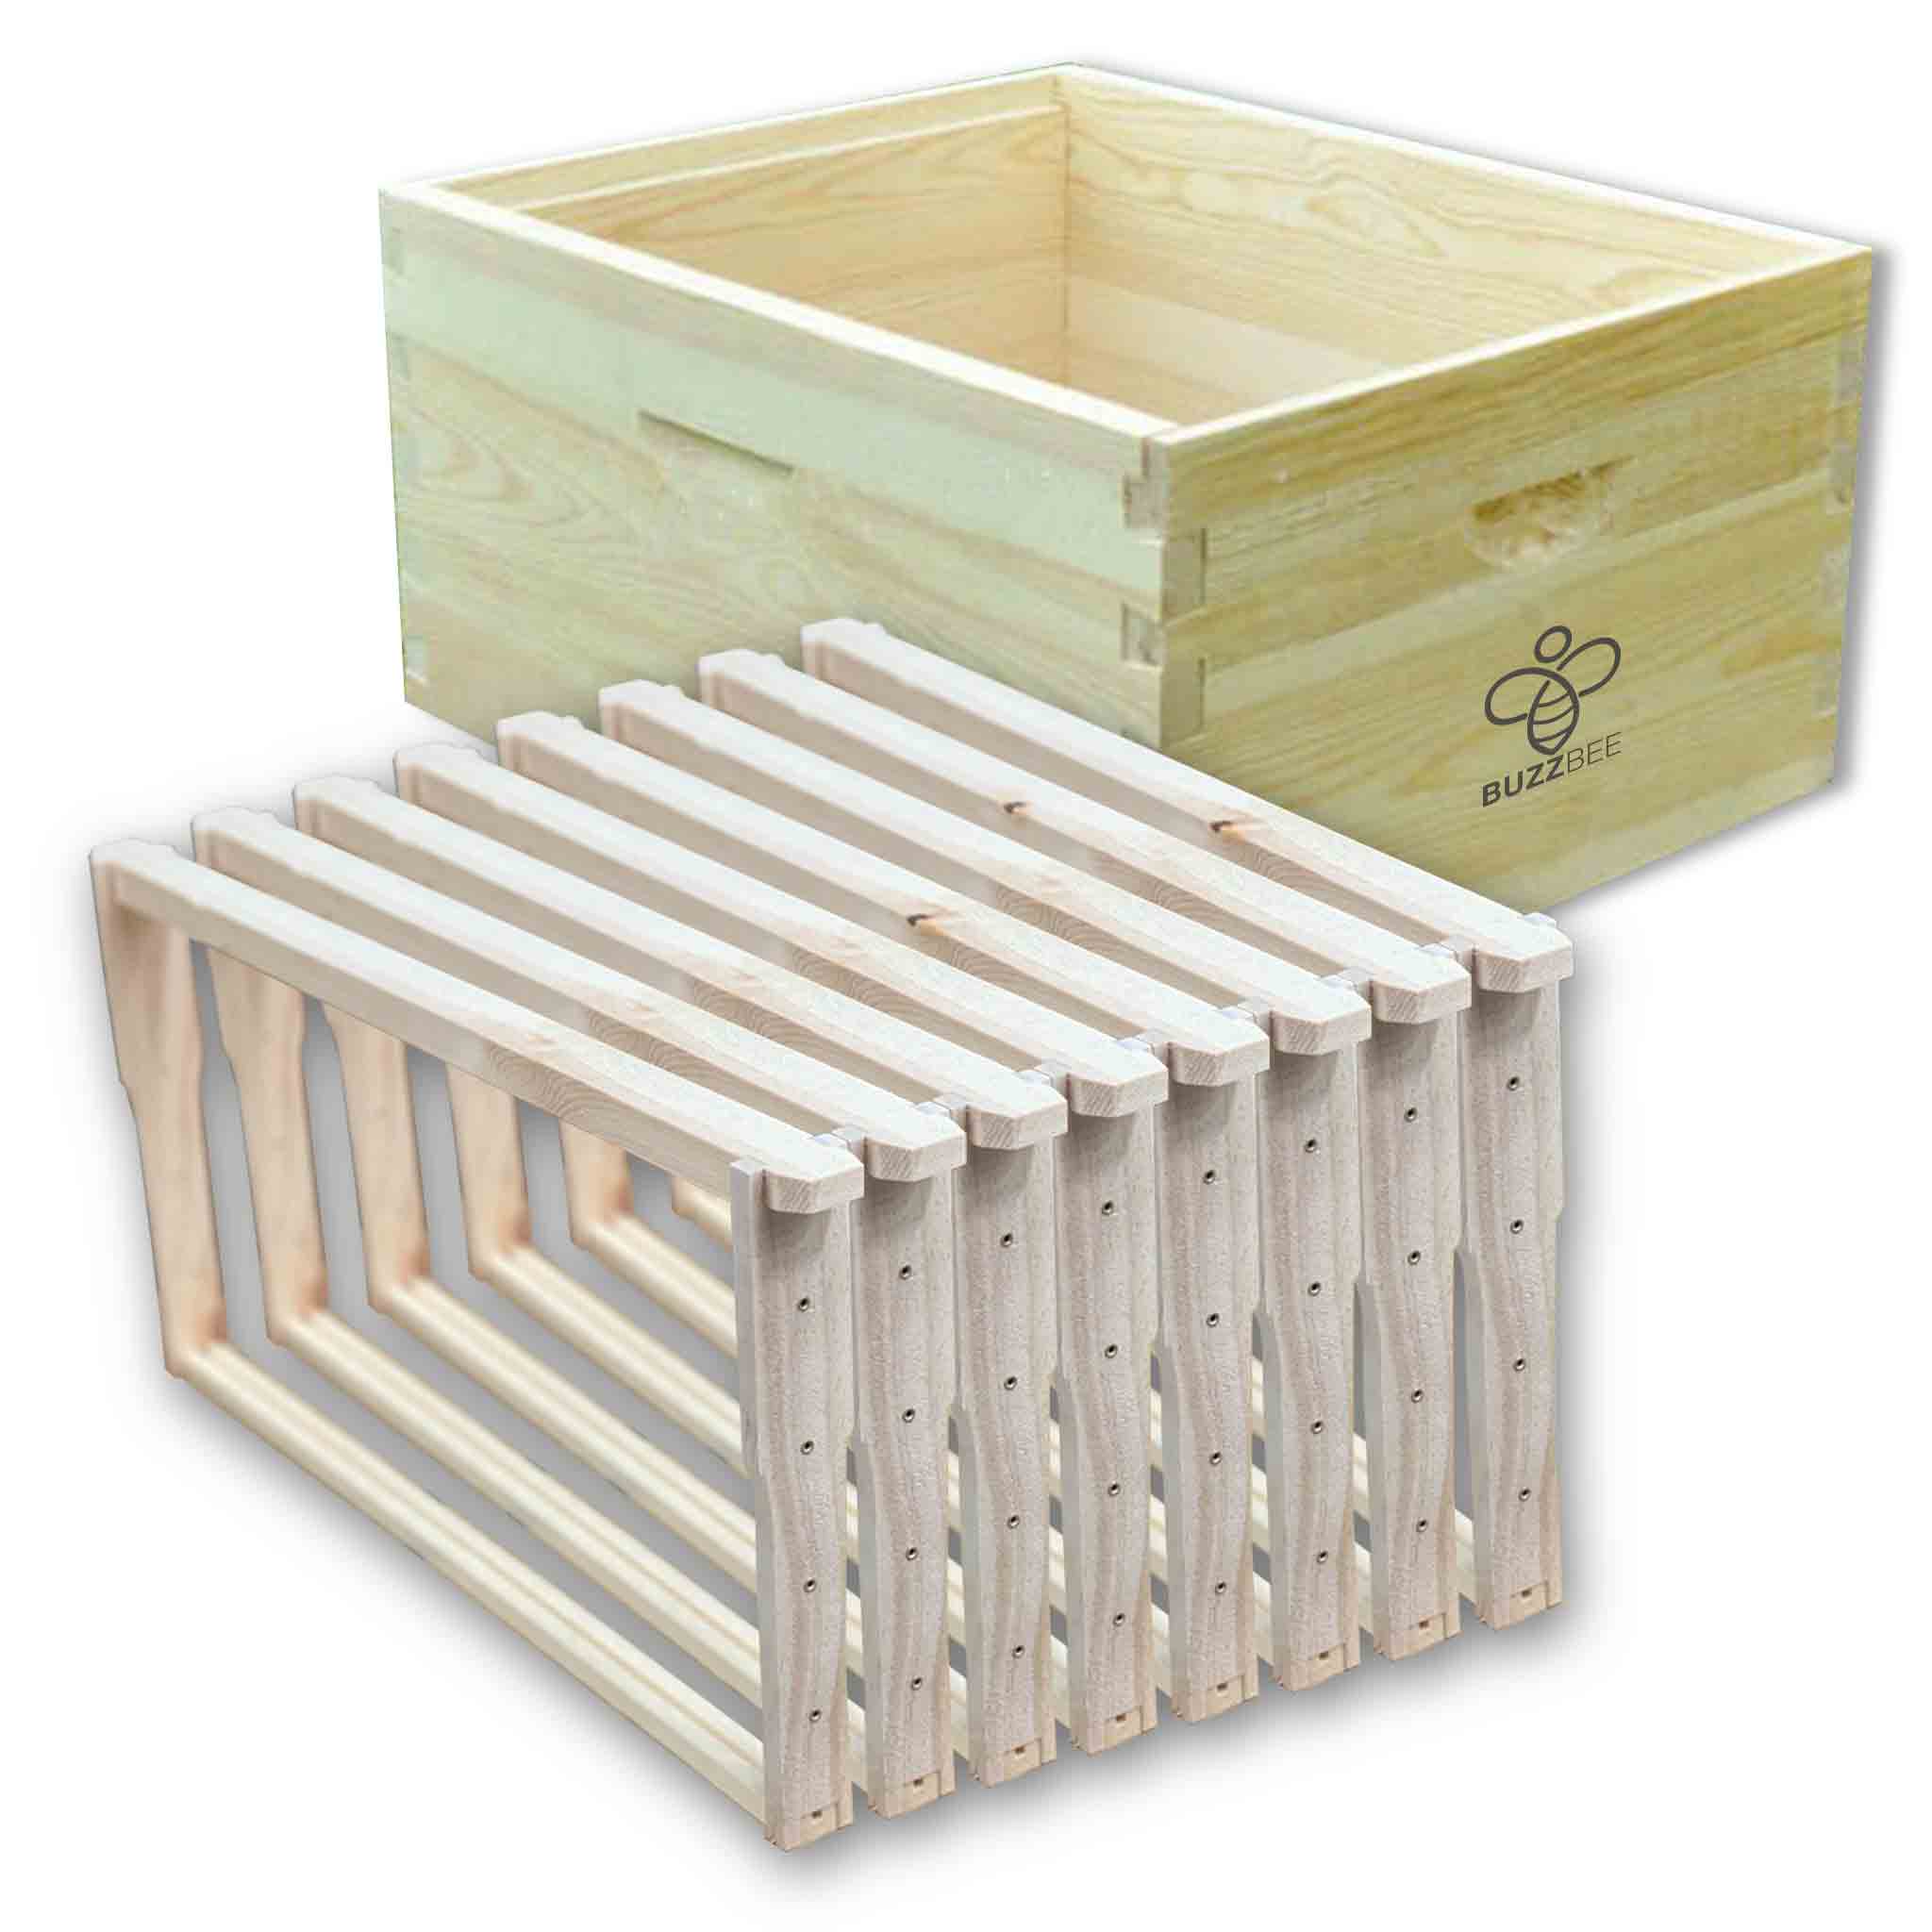 Box Super Deep Add-on Kit - Hive Parts collection by Buzzbee Beekeeping Supplies